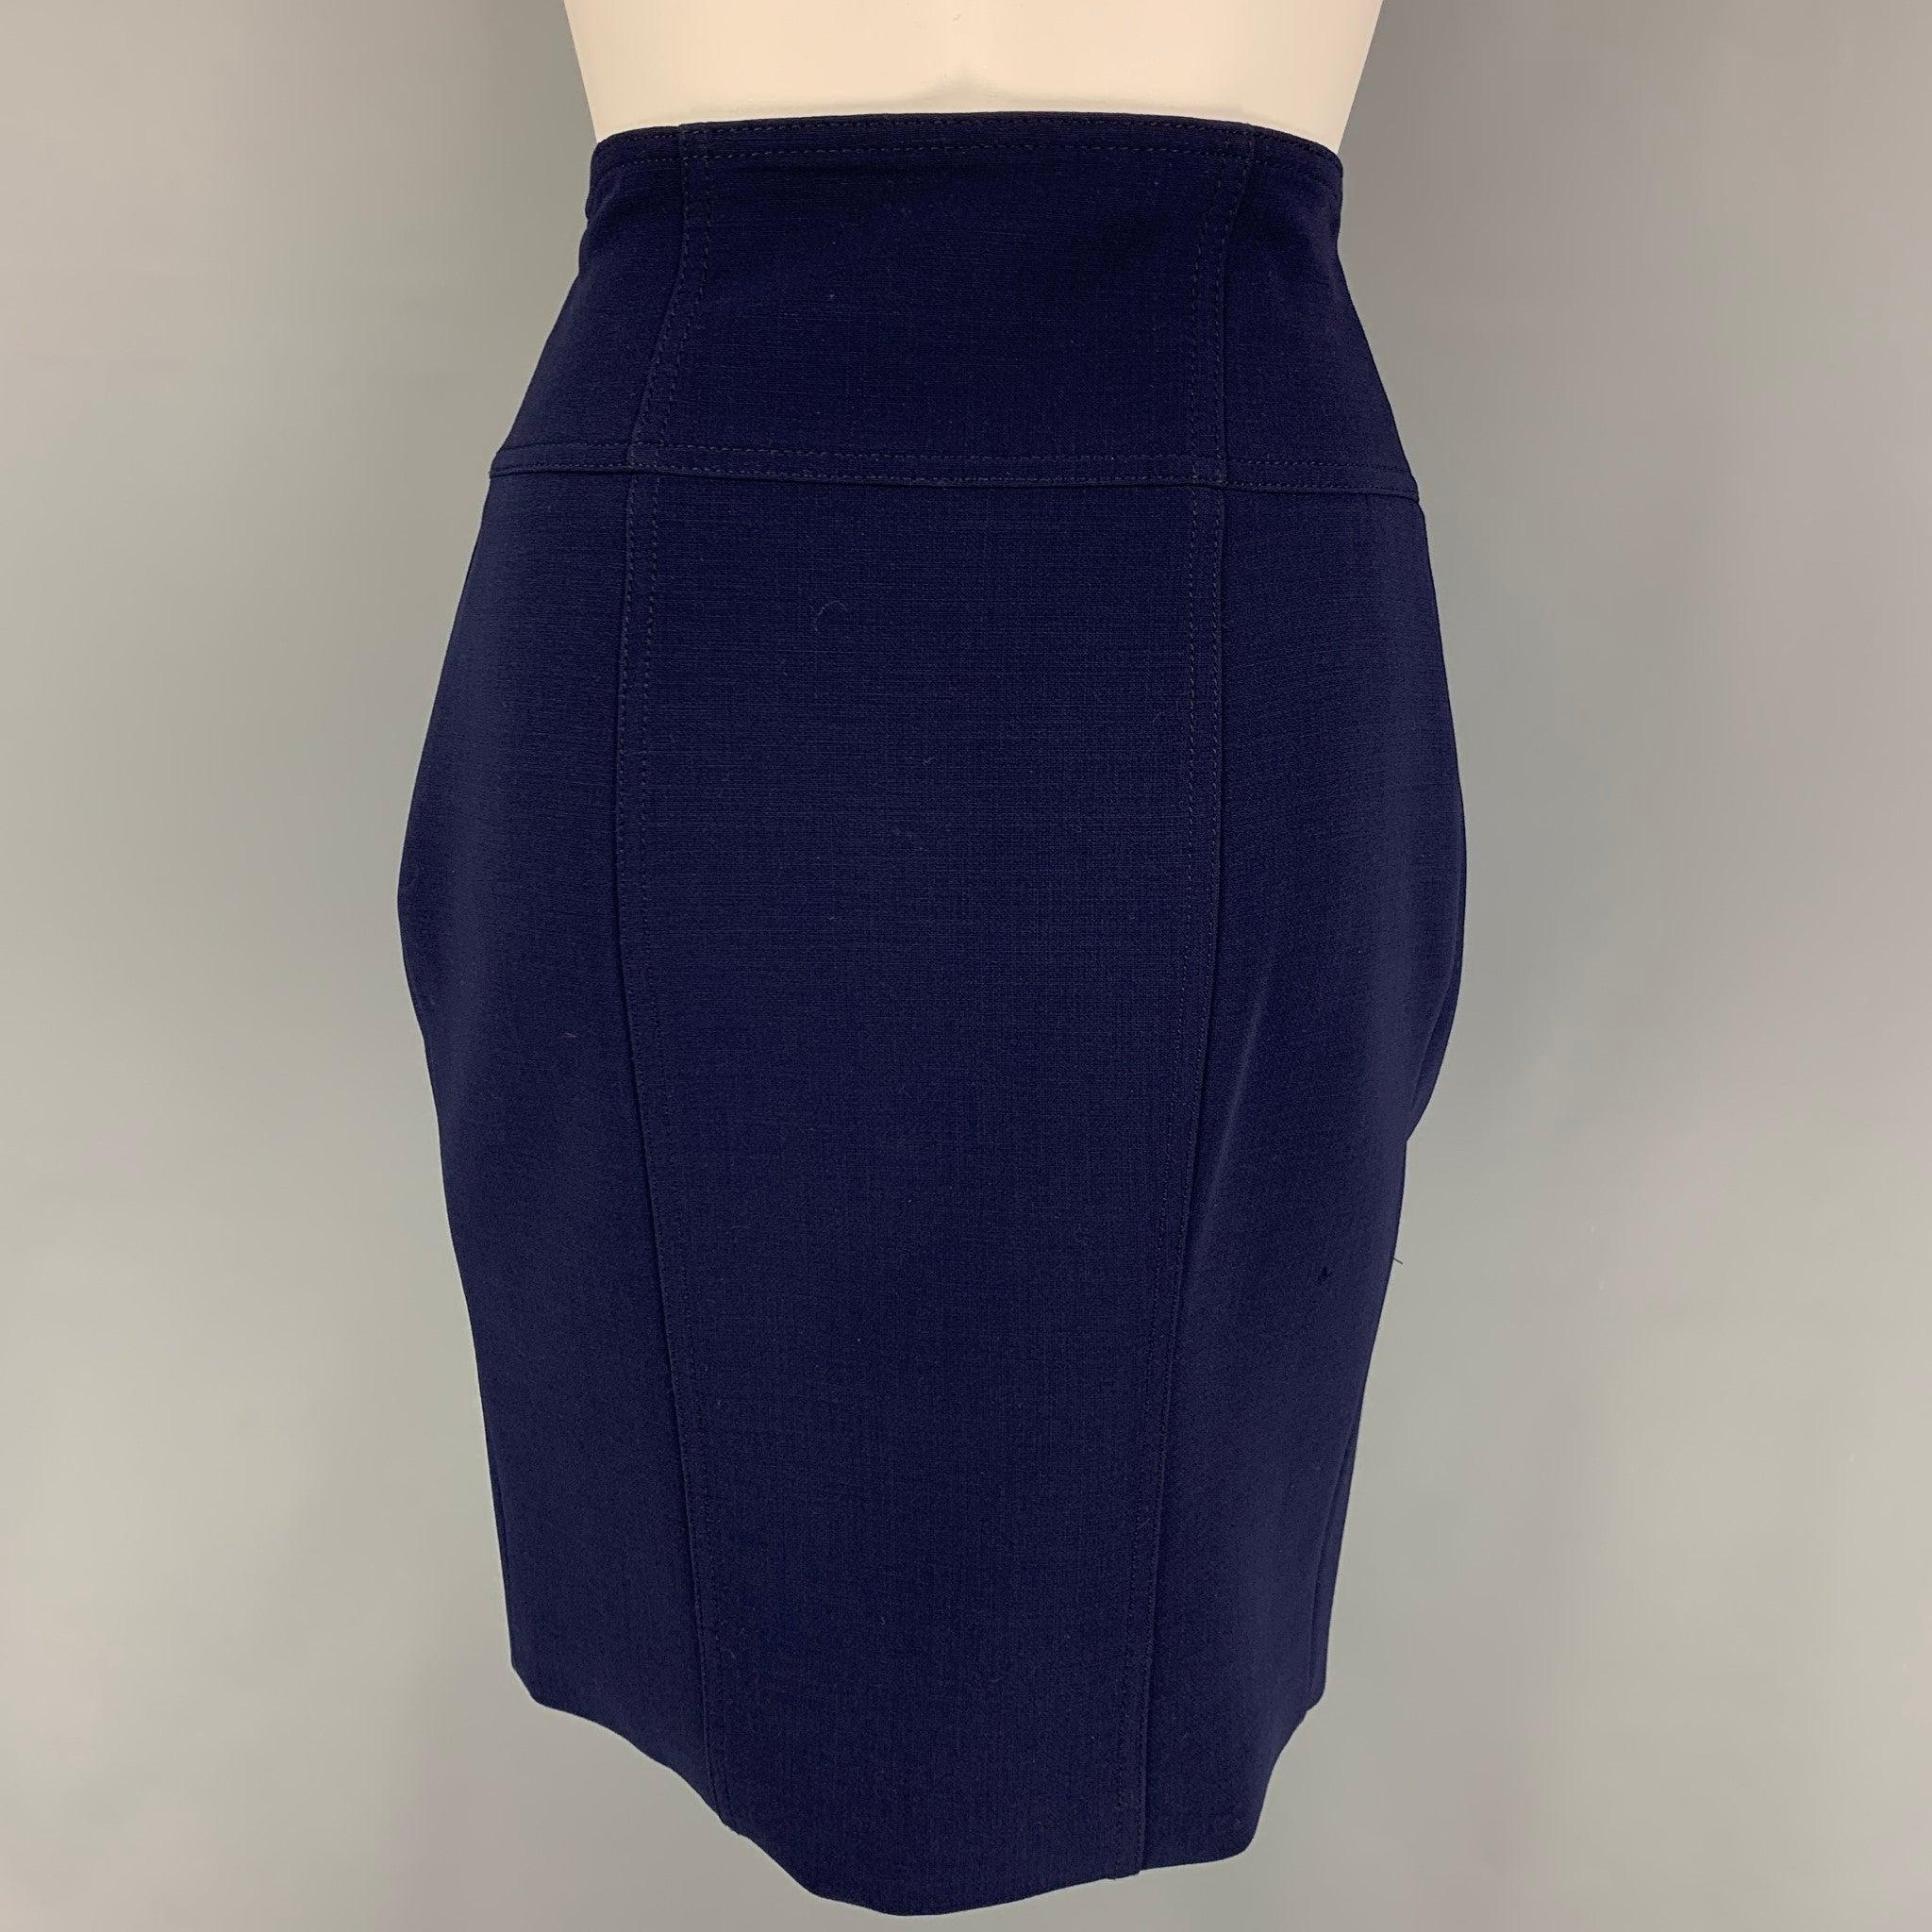 RALPH LAUREN Black Label Size 4 Navy Wool Pencil Knee-Length Skirt In Good Condition For Sale In San Francisco, CA